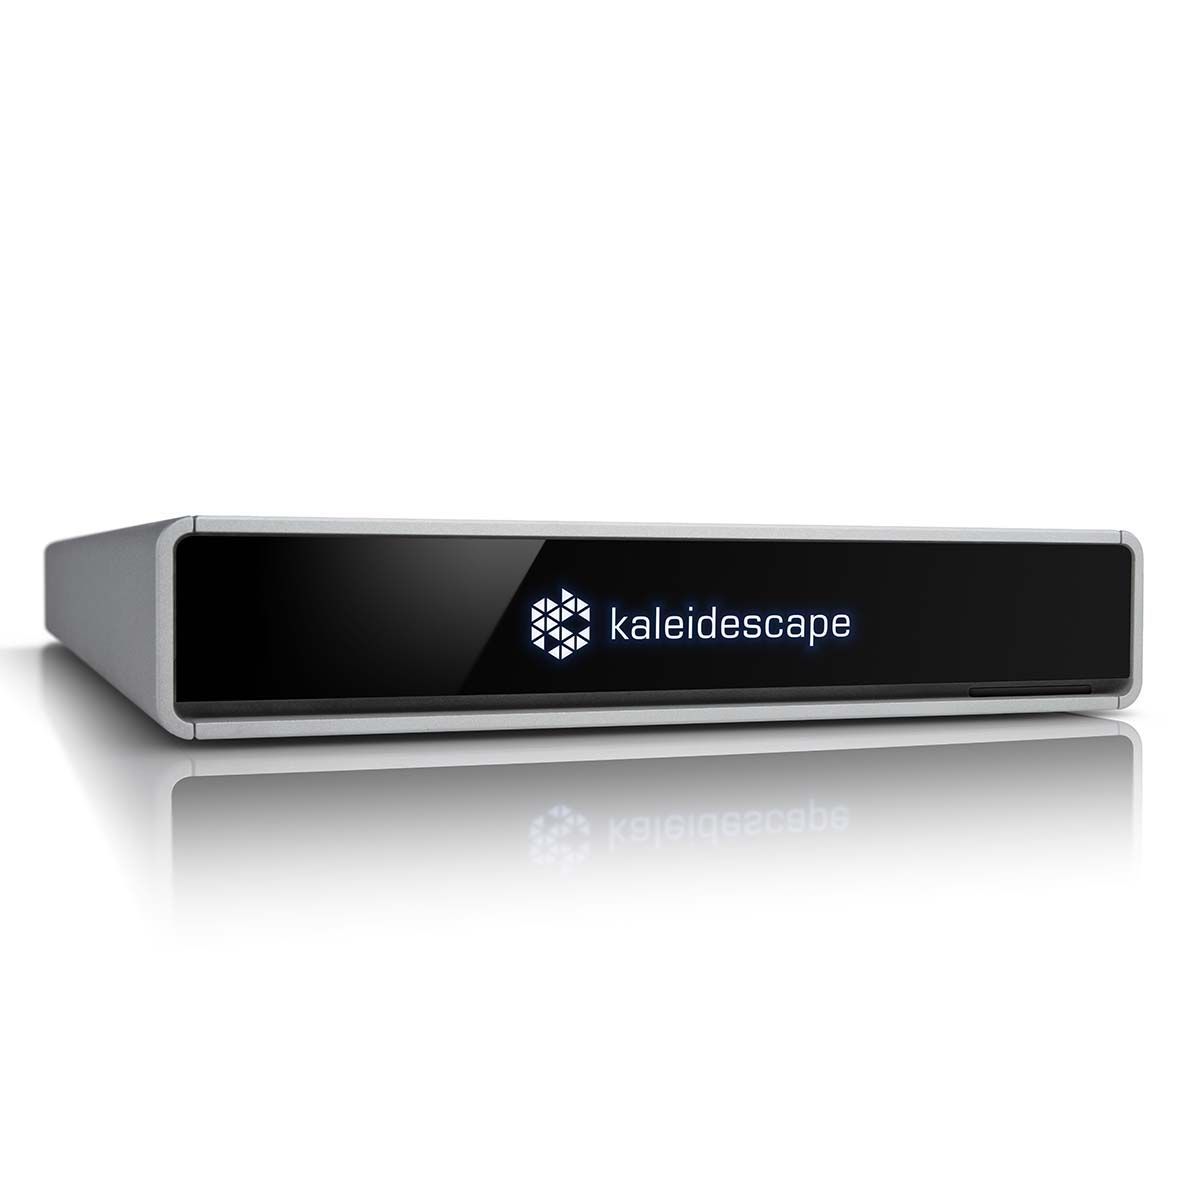 Kaleidescape Compact Terra Movie Server 6TB Storage For Home Theaters | Stores 100 4K UHD Movies